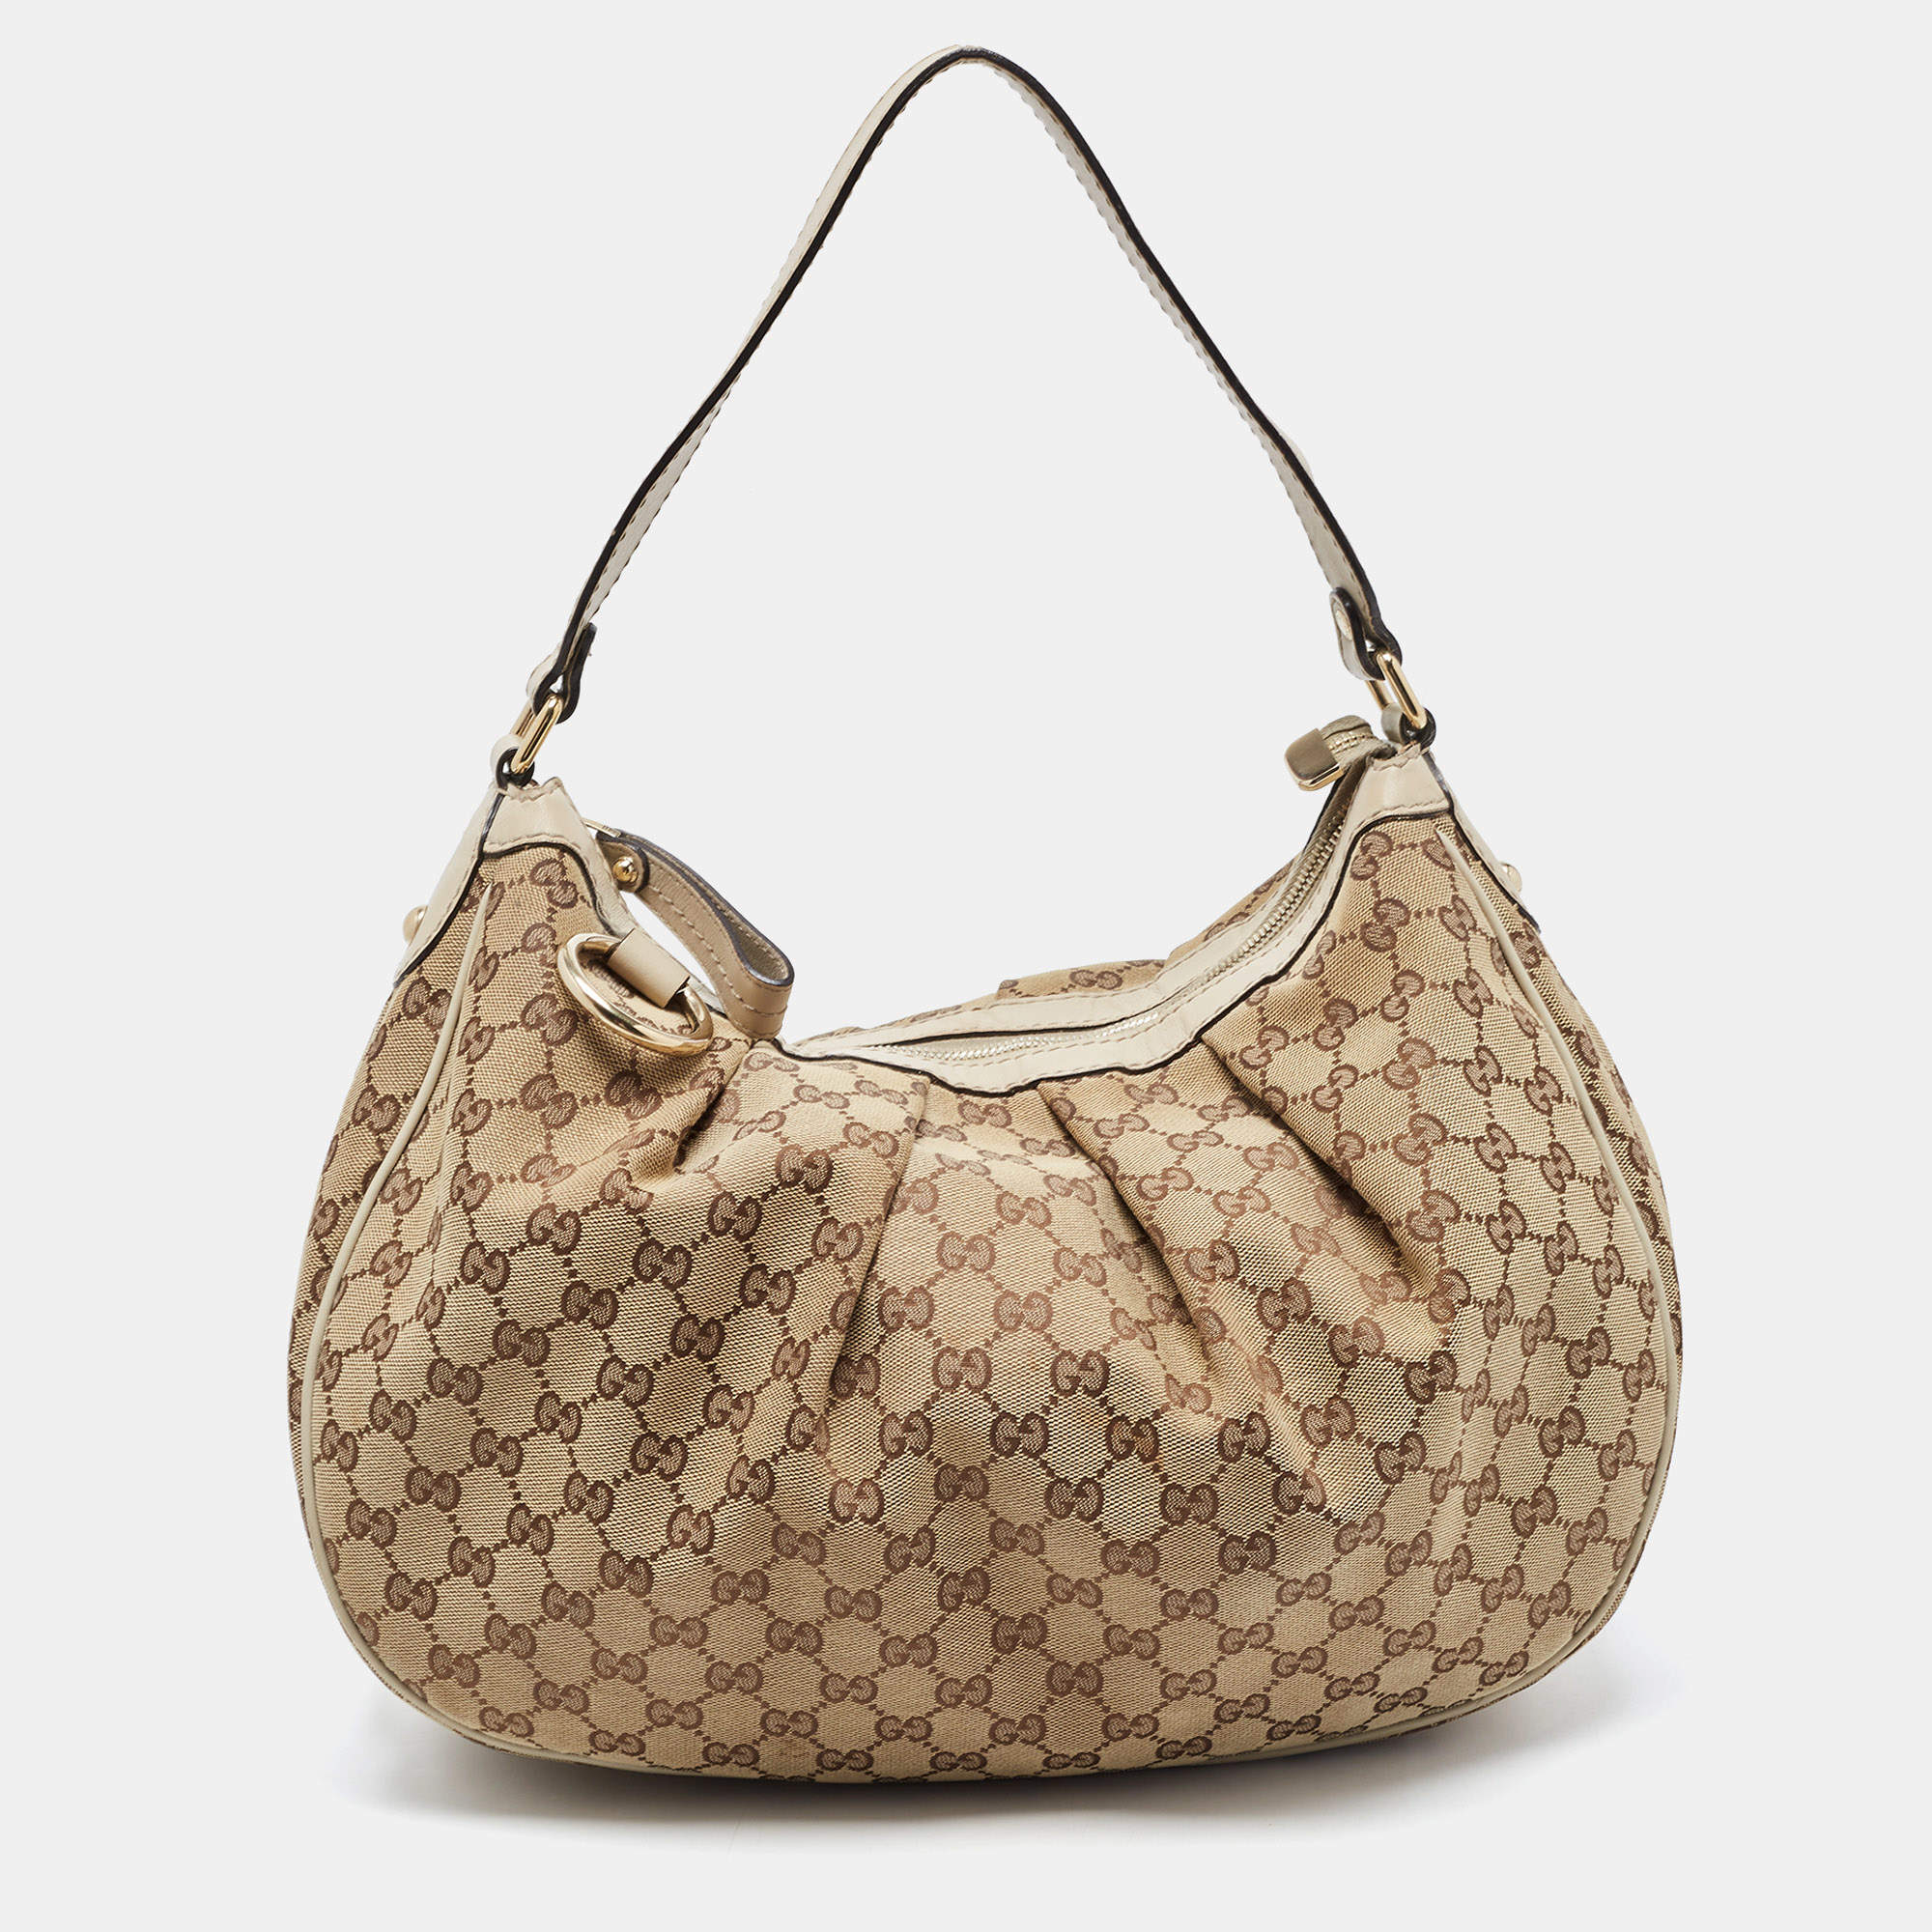 Gucci Beige/White GG Canvas and Leather Medium Sukey Hobo